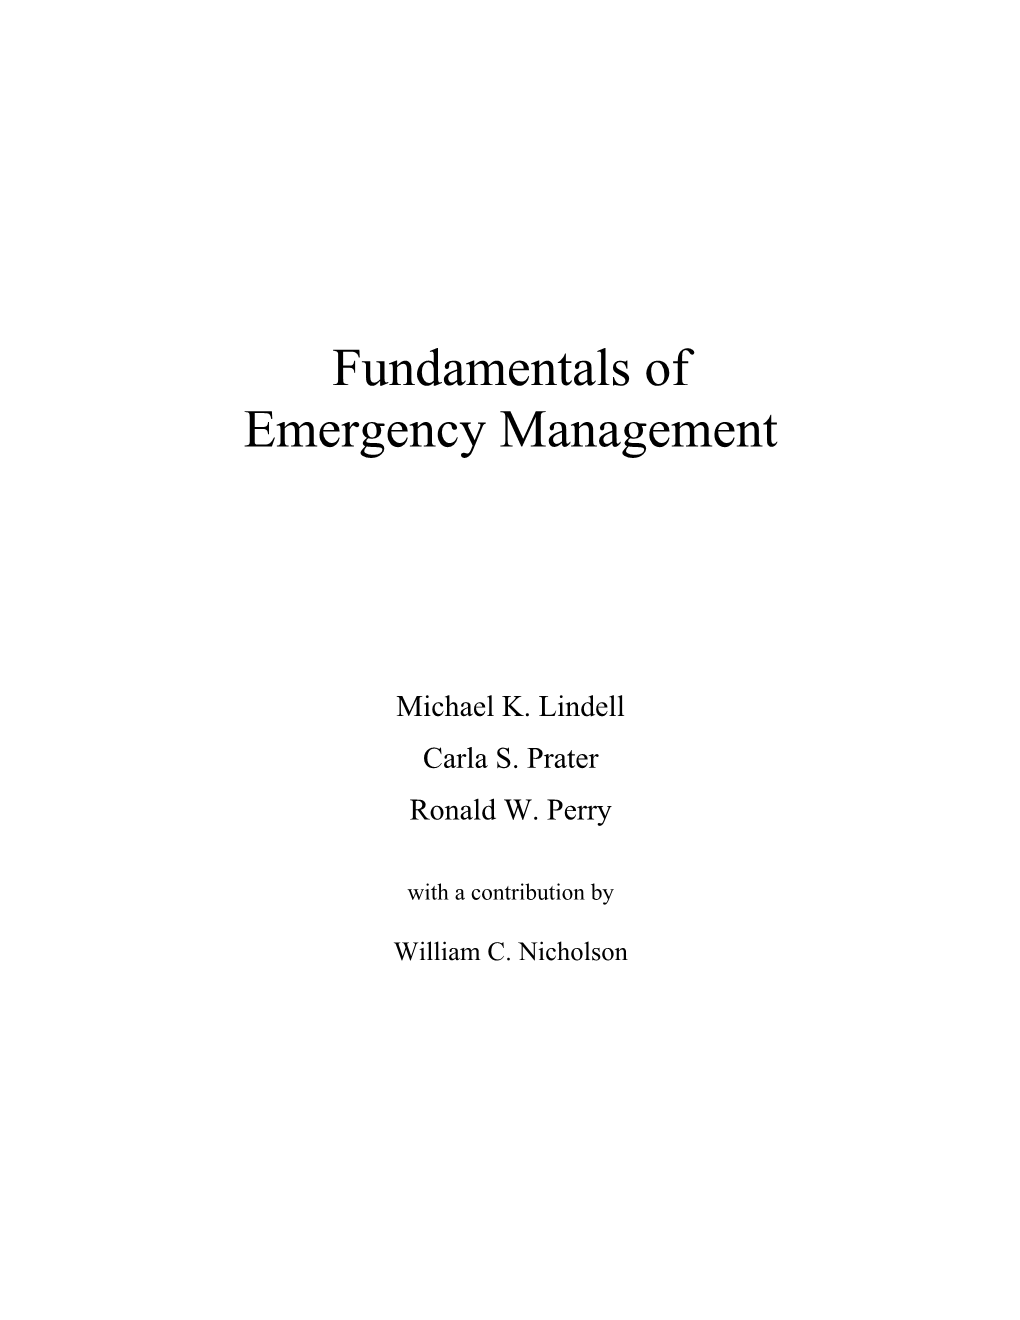 Emergency Management: an Introduction to the Discipline